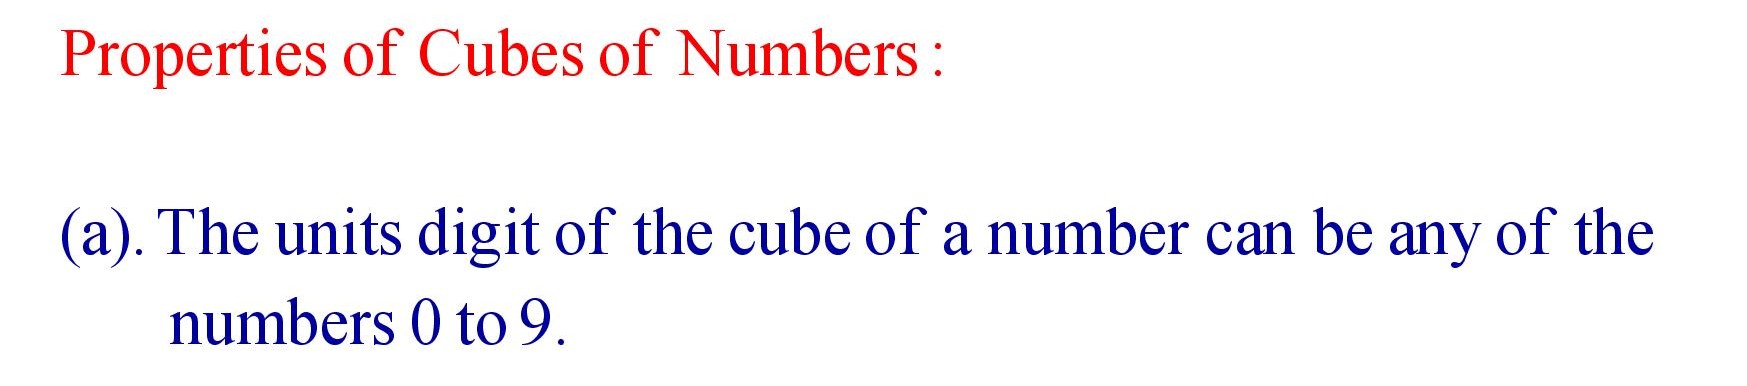 Properties of Cubes of Number